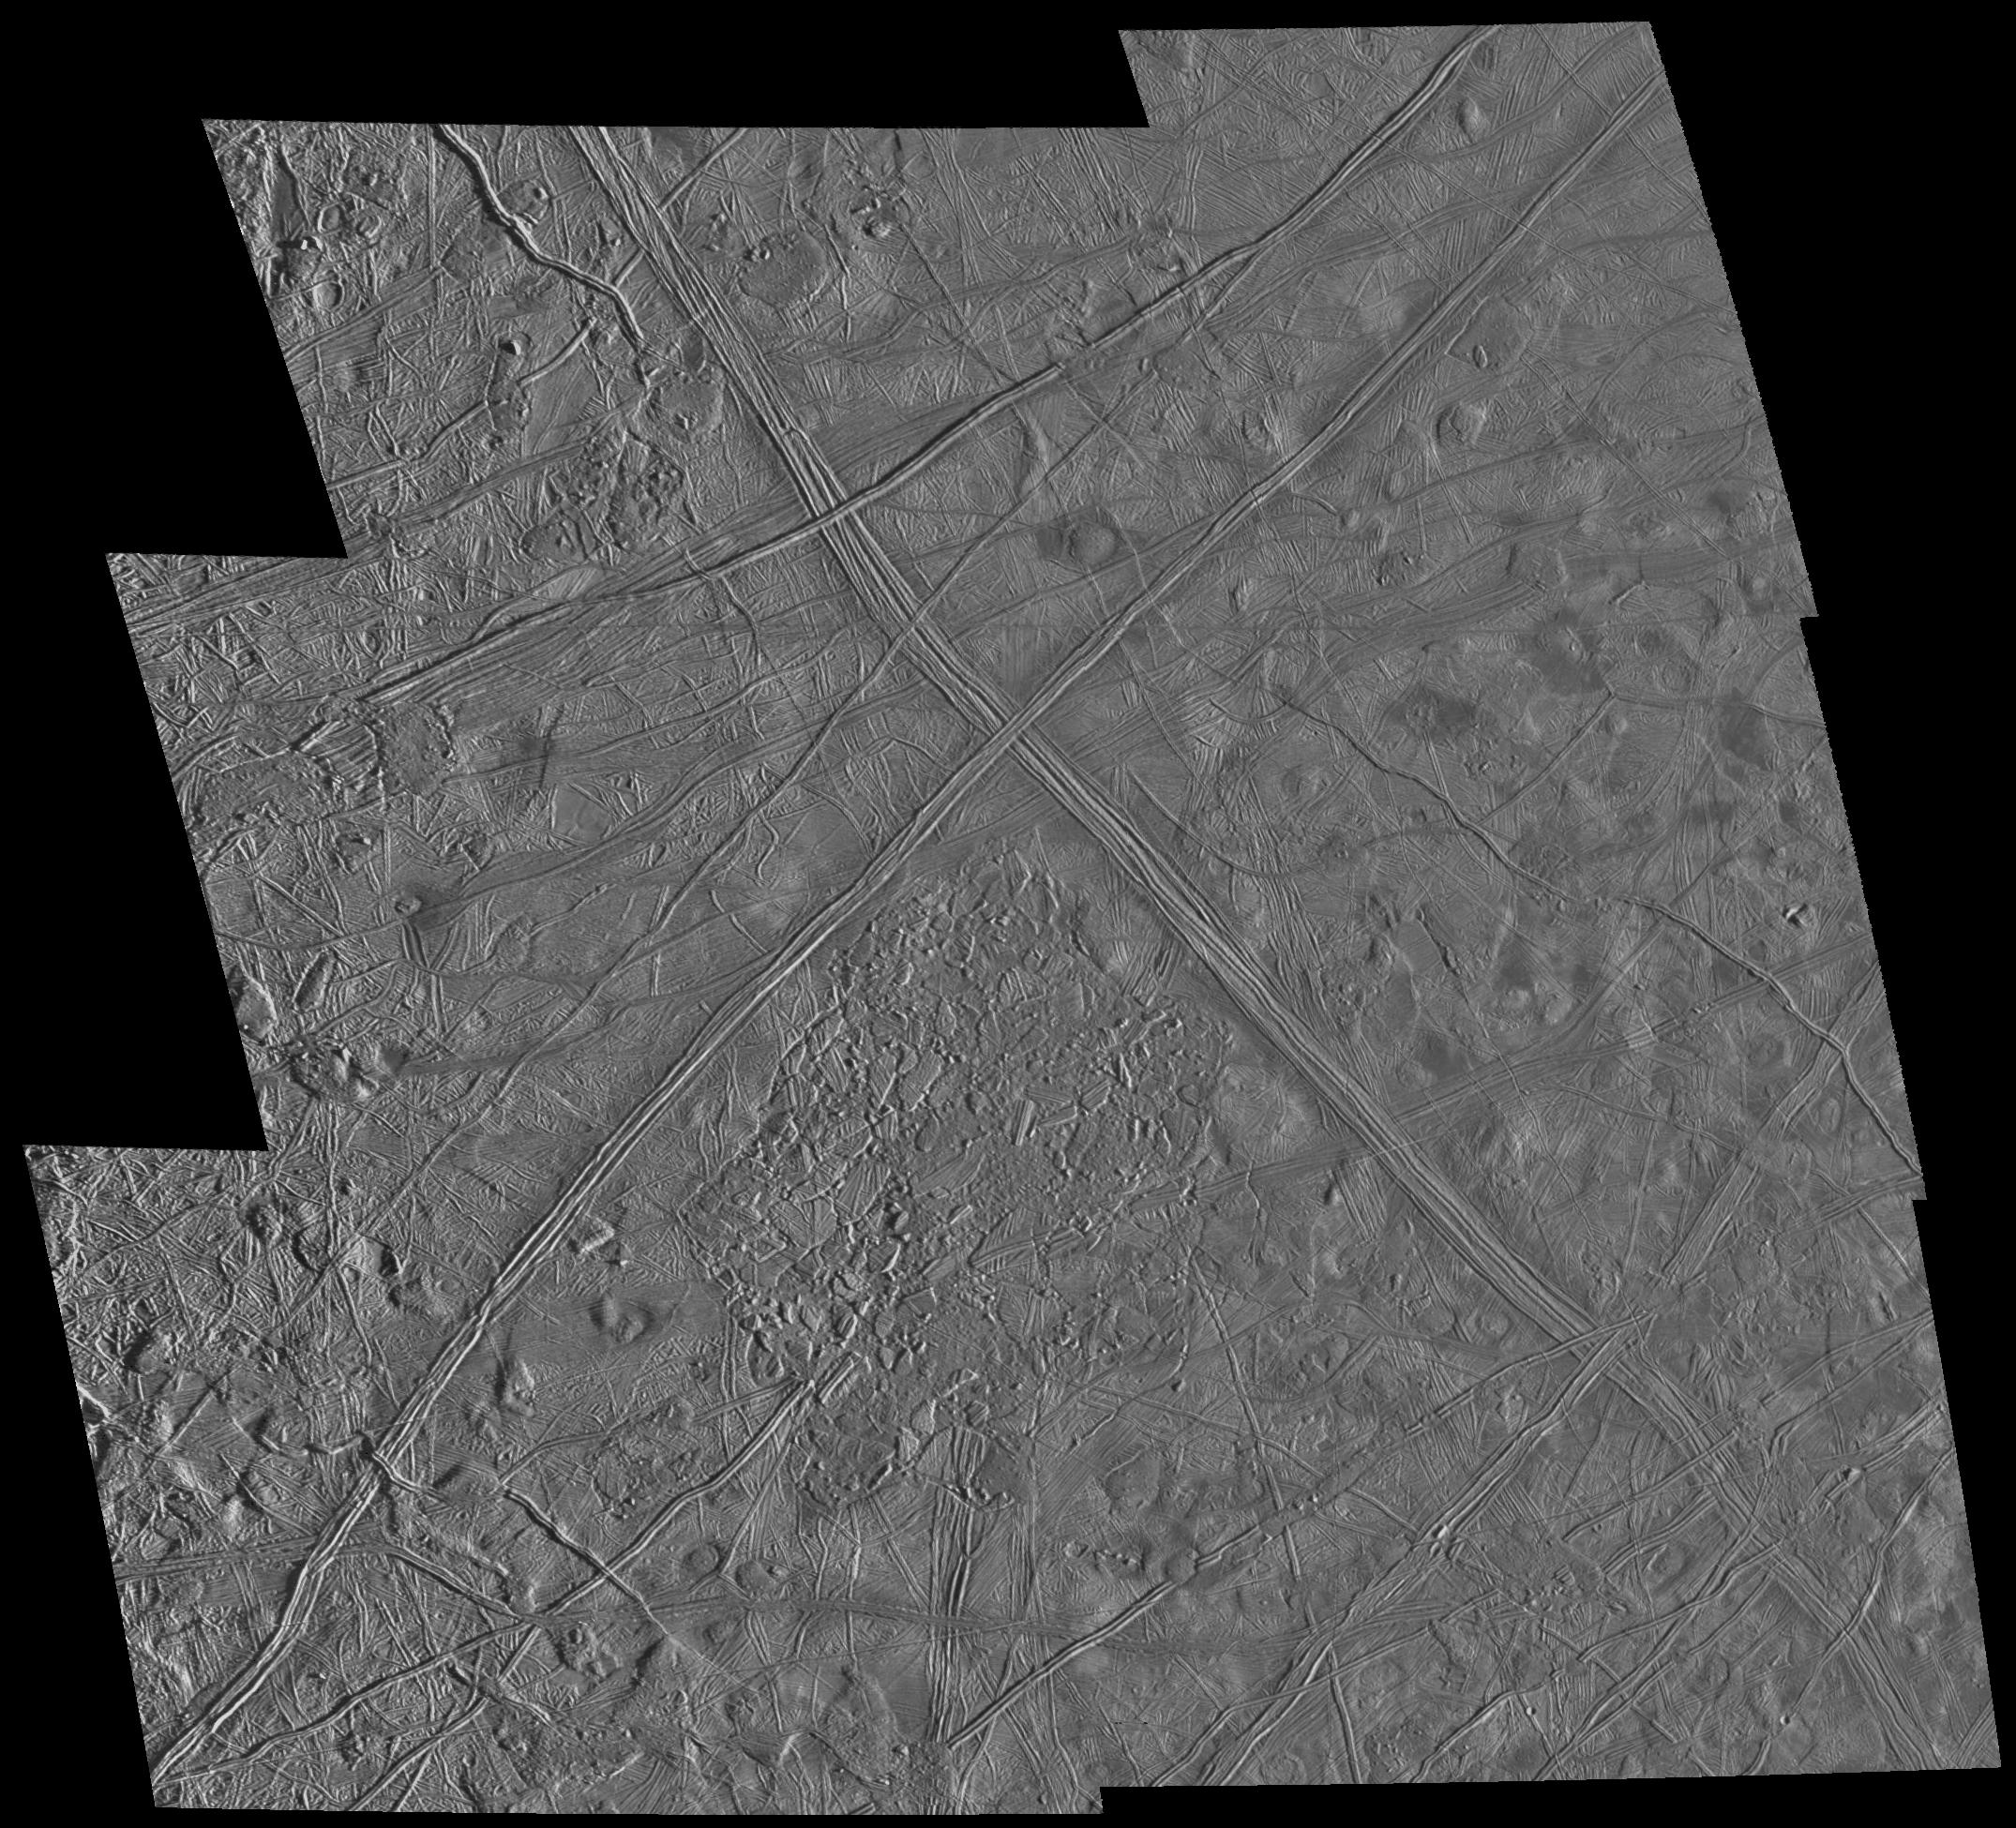 Ridges form X on surface of Europa